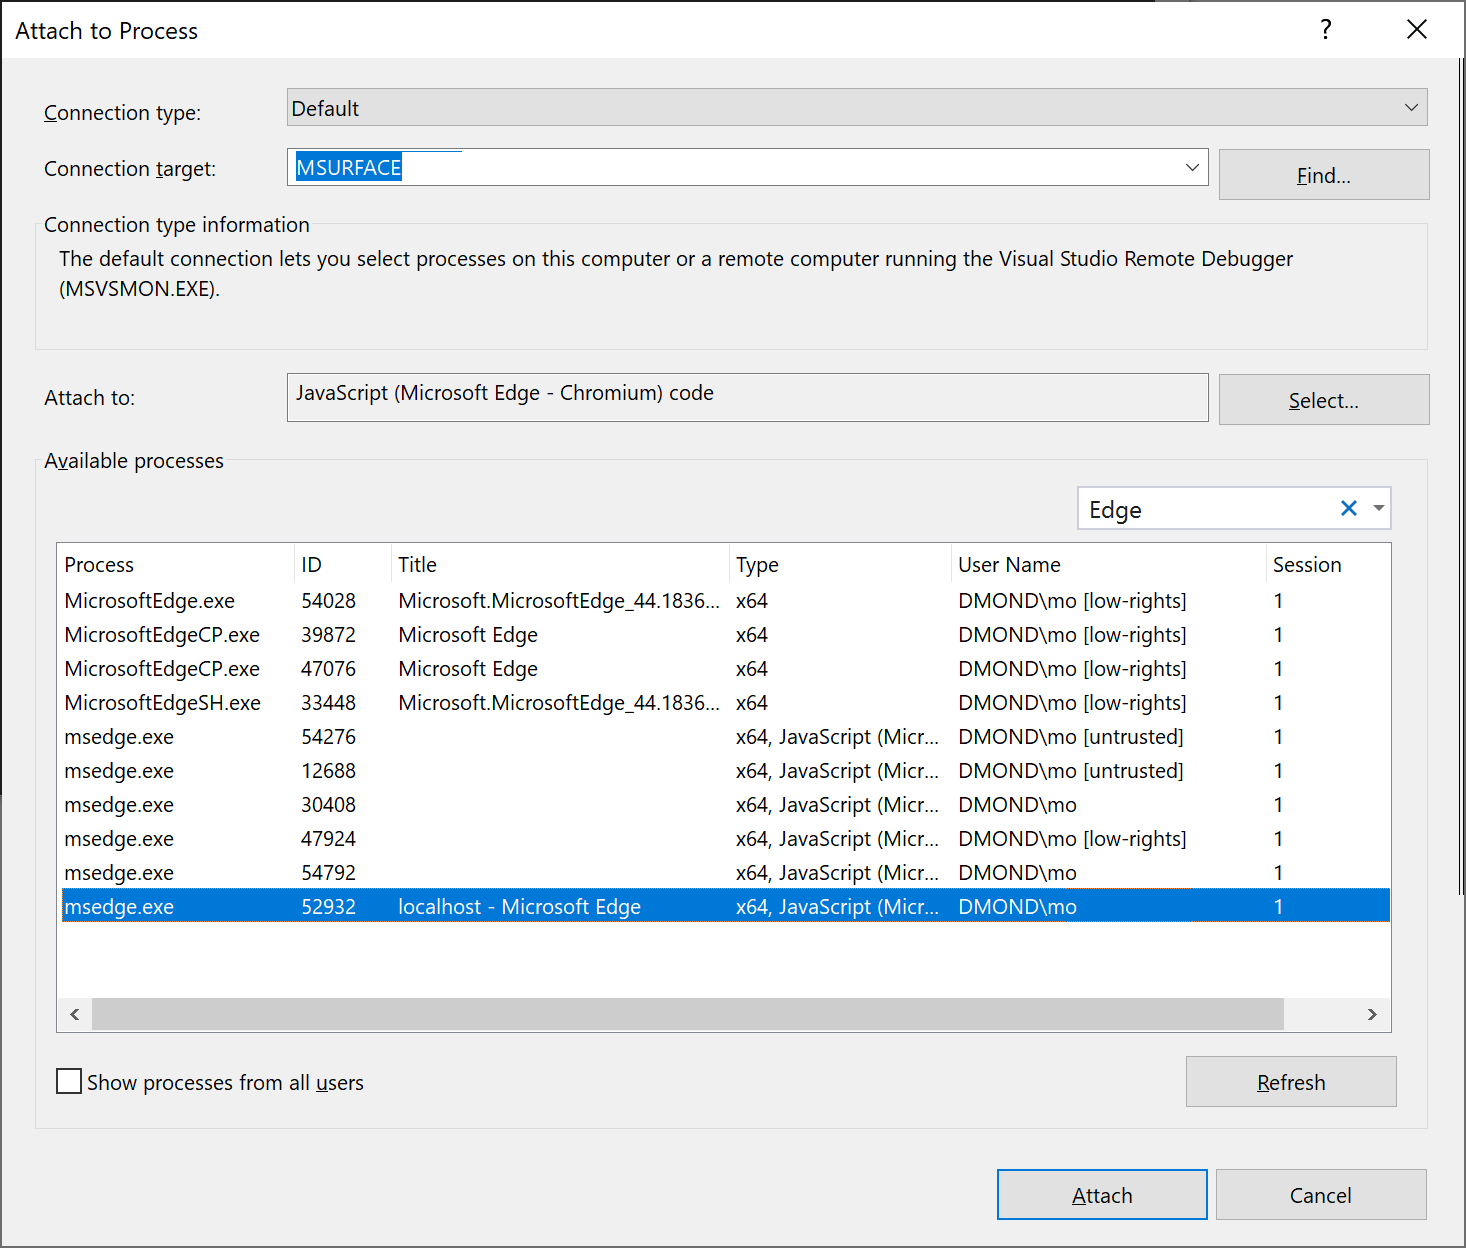 Screenshot showing how to Attach to a process in Debug menu.